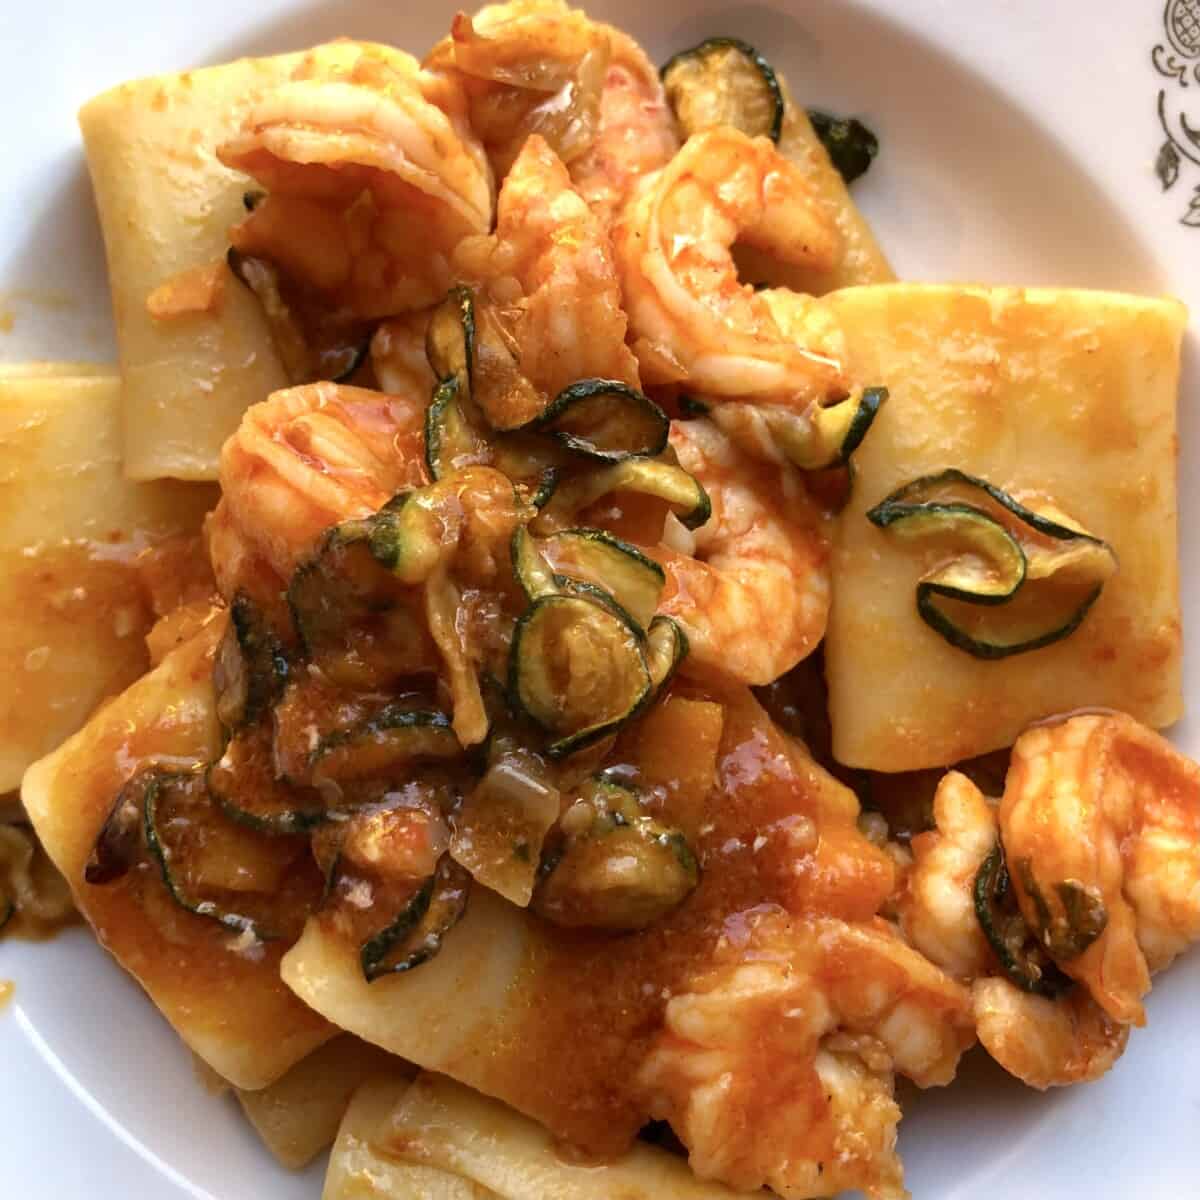 Pasta bowl filled with easy paccheri pasta with shrimp and zucchini in white wine tomato sauce.